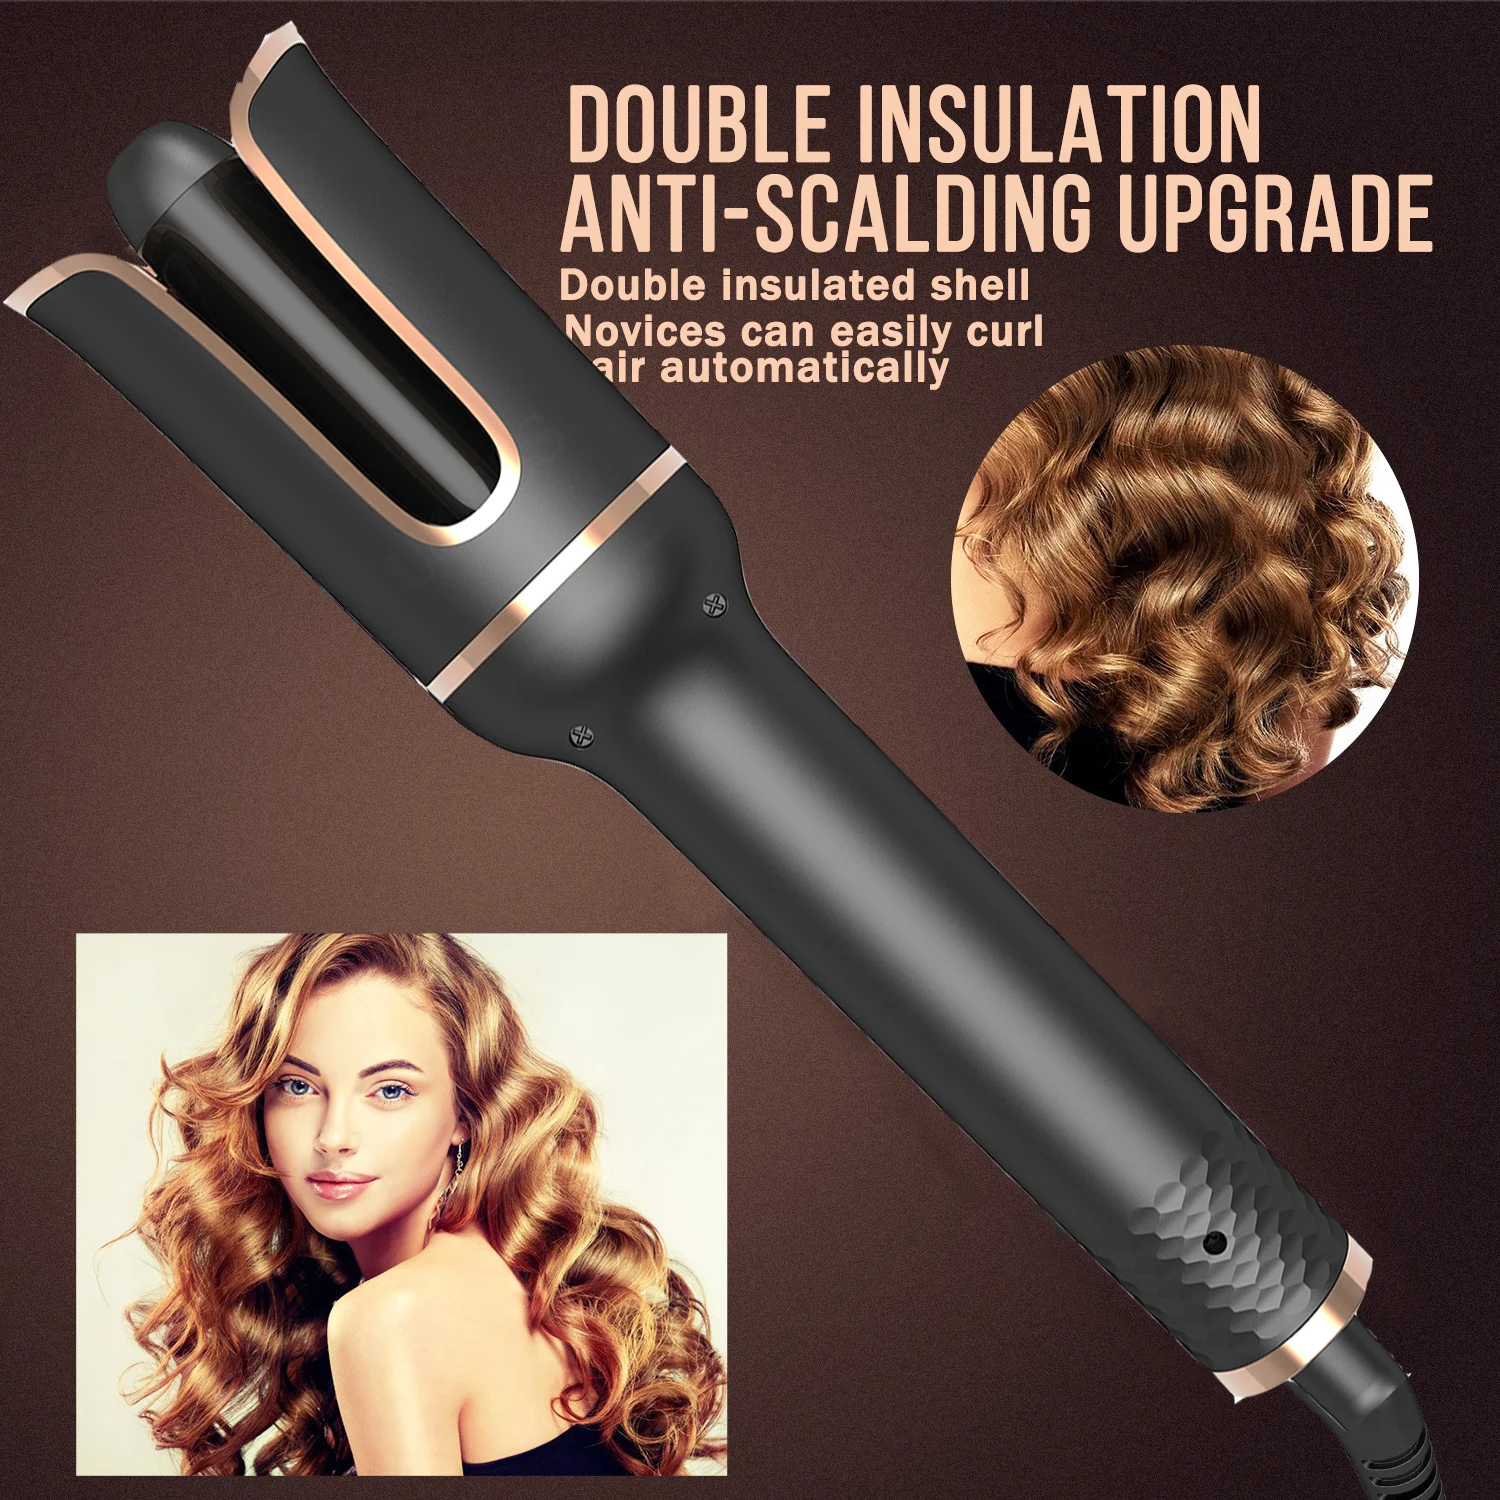 Multi Automatic Hair Curler Air Spin Curling Iron Auto Rotating Ceramic Rotating Hair Waver Magic Wand Irons Hair Styling Tools adjustable temperature electric soldering irons heater 220v 60w 80w 100w ceramic internal heating element solder accessories